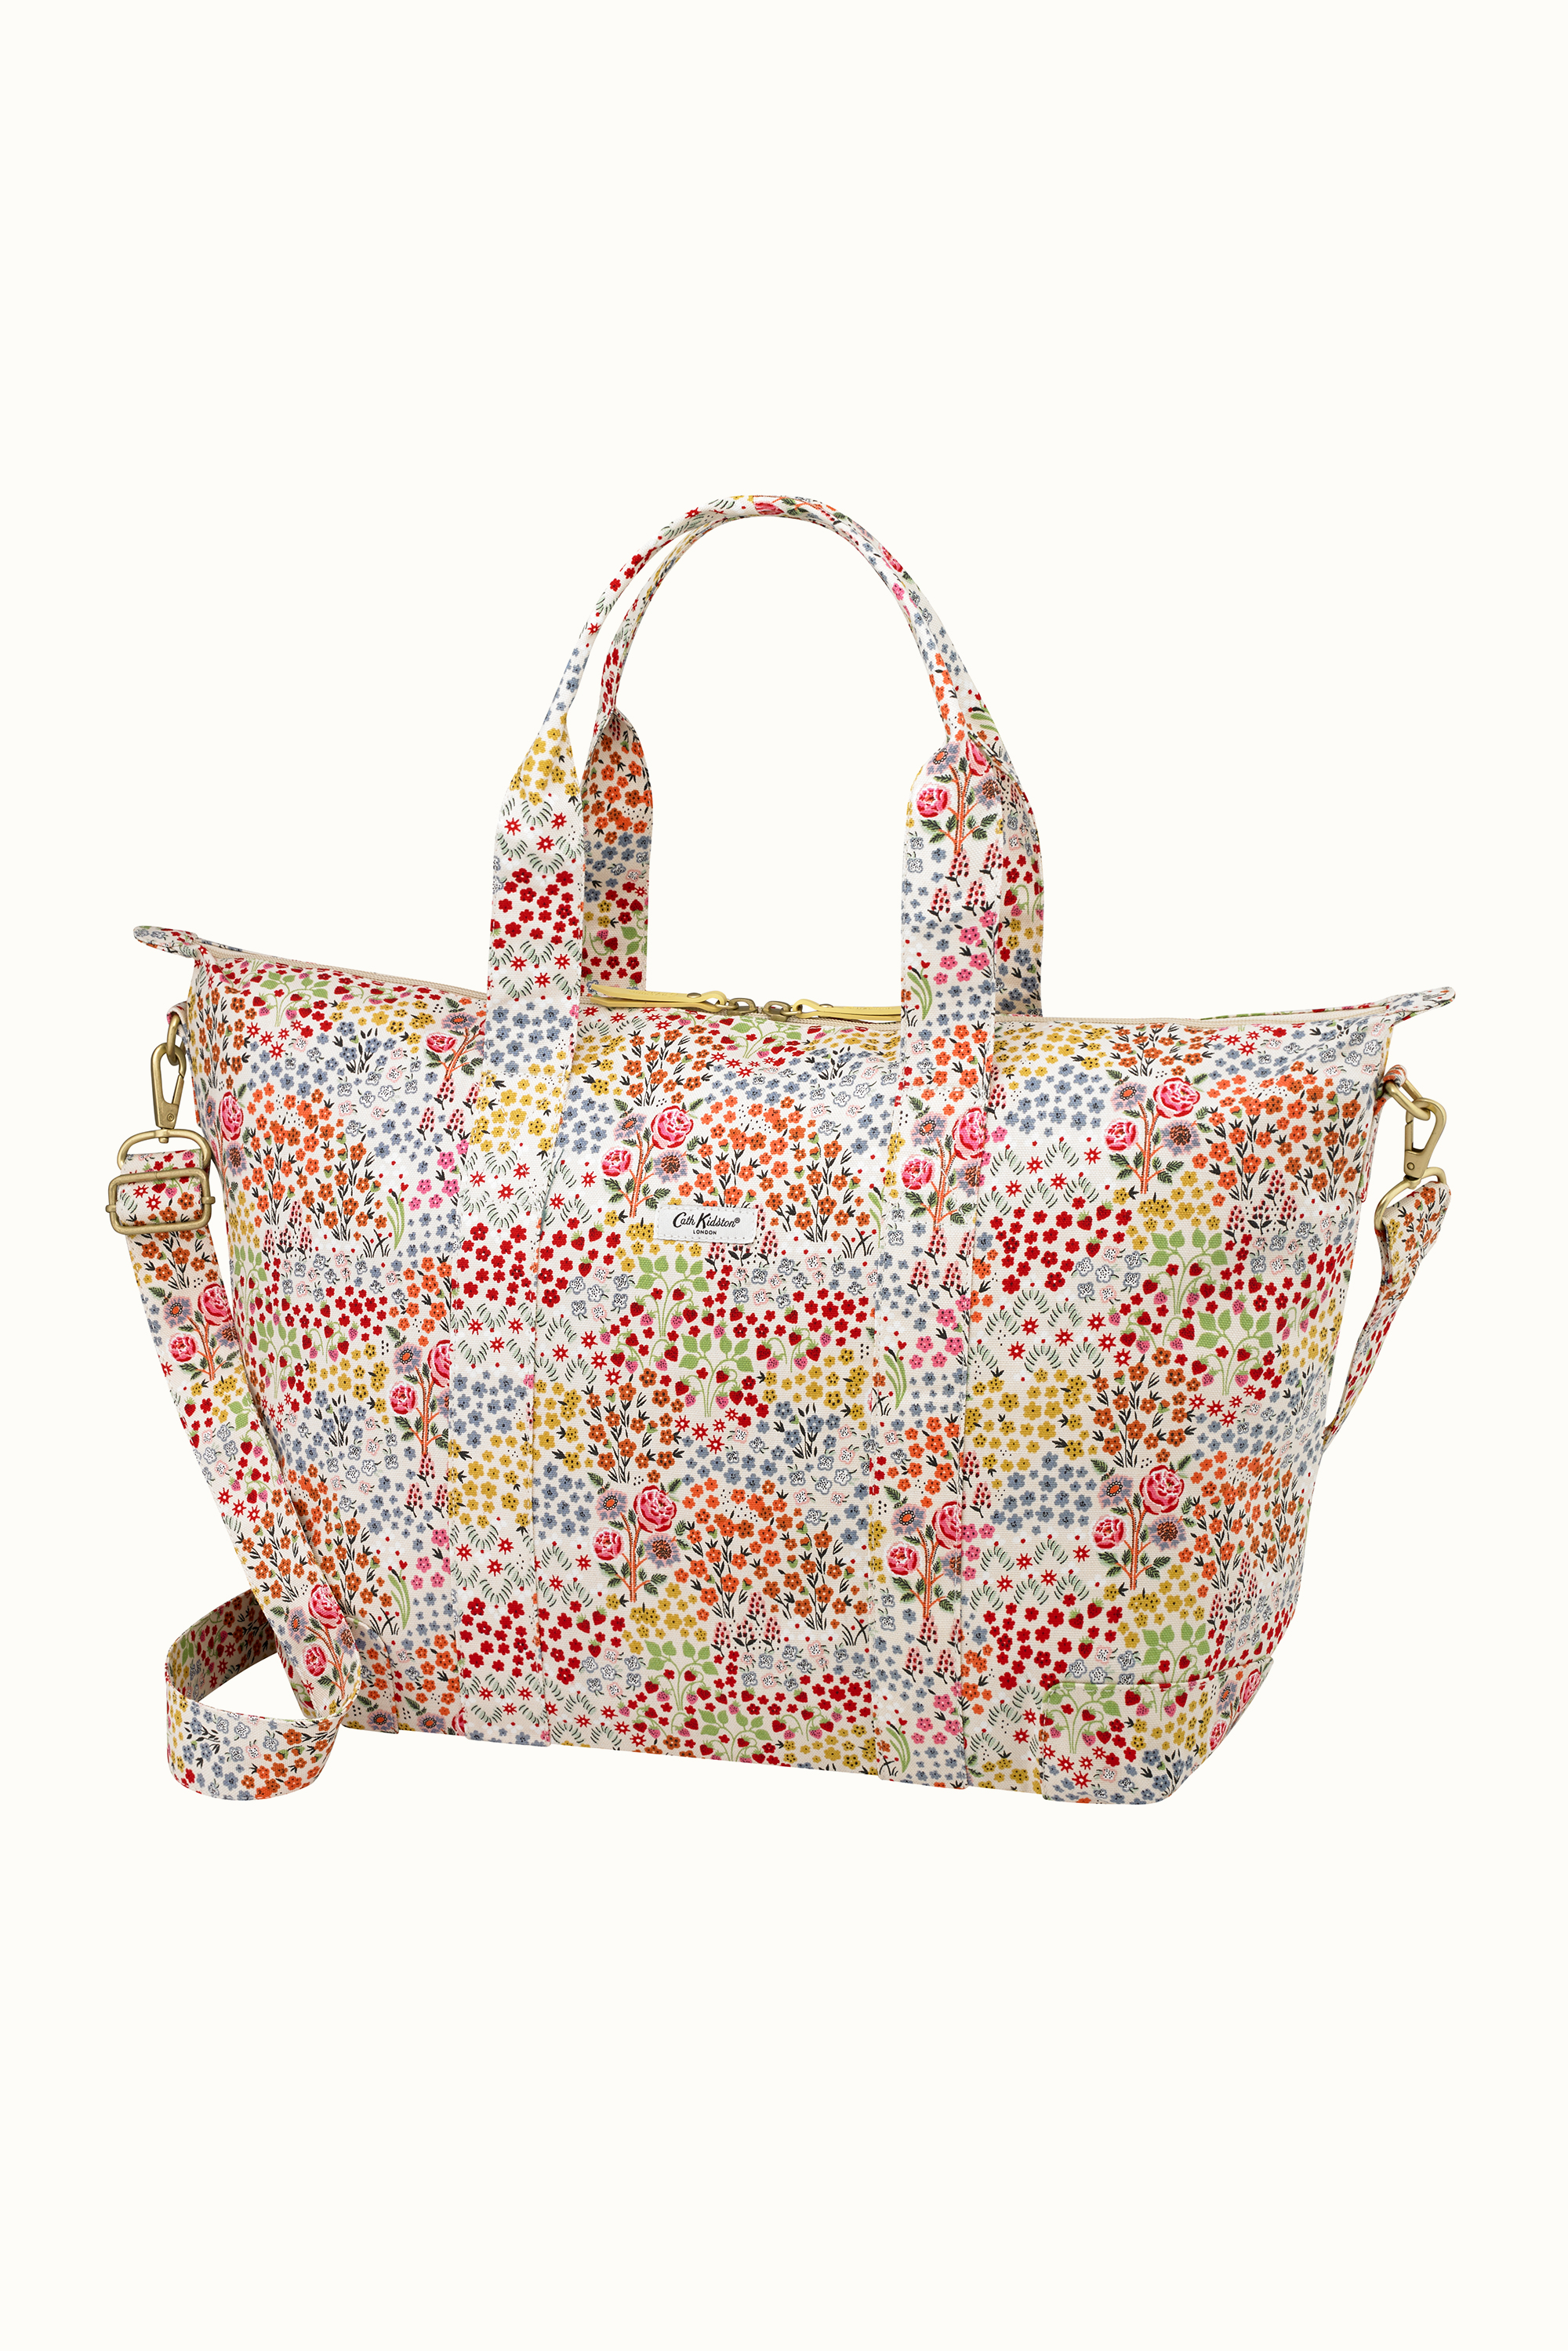 My Cath Kidston Collection 2013 | Polka Spots and Freckle Dots